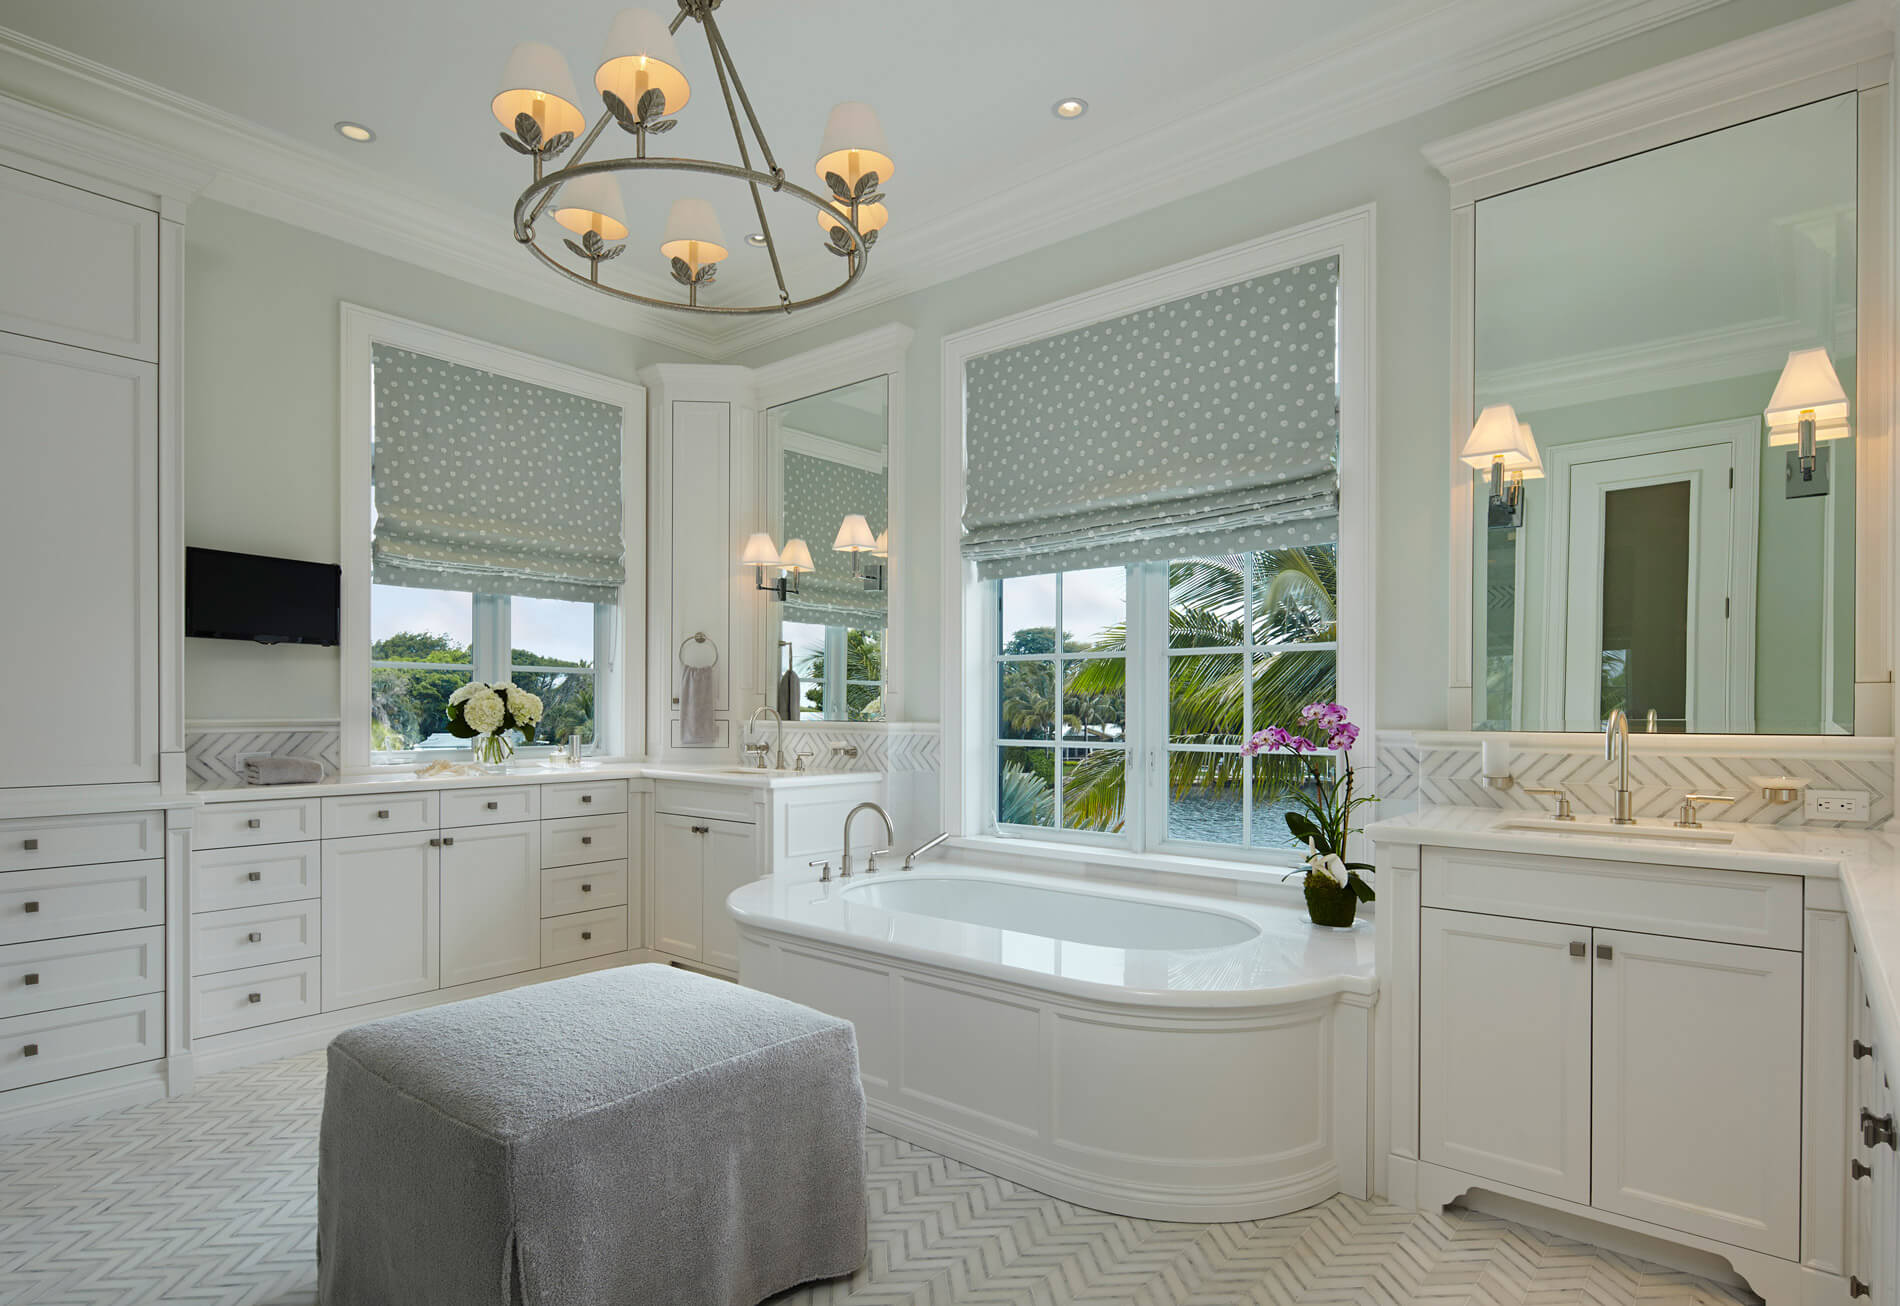 A bathroom with a large tub and white cabinets.